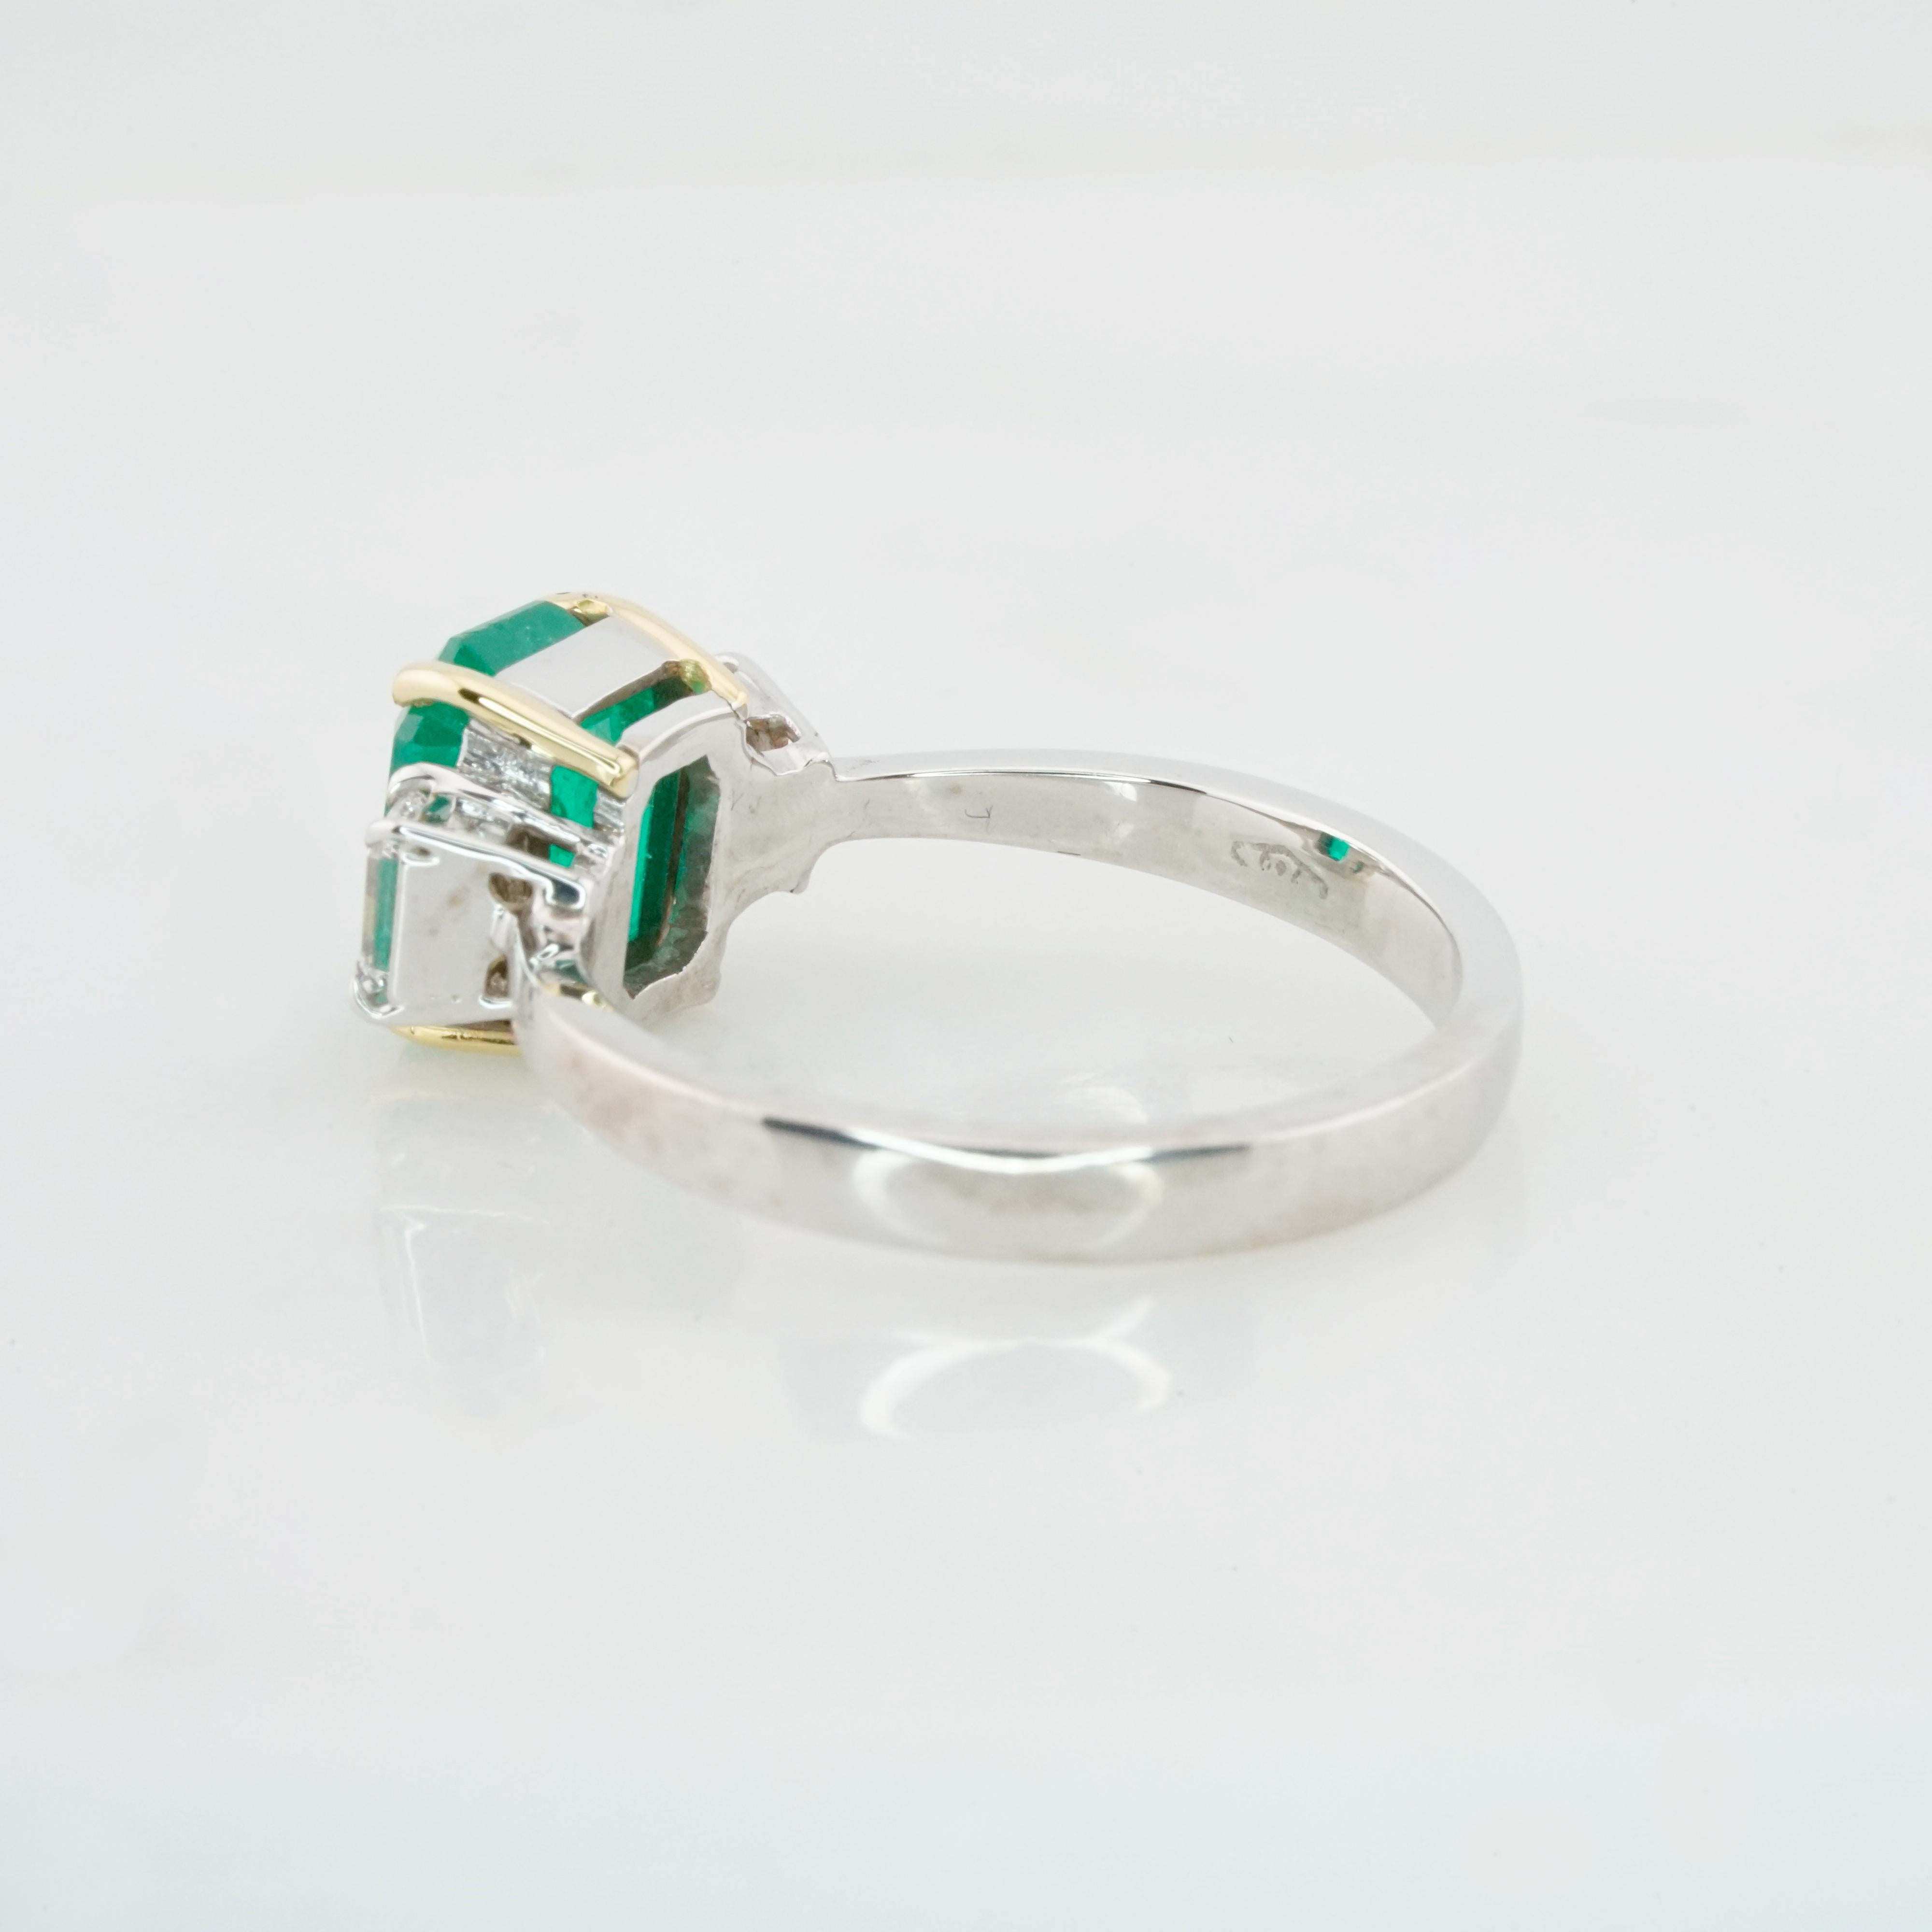 Emerald Cut AIGS Certified 2.12 Carat Vivid Green Colombian Emerald 18K White Gold Ring For Sale